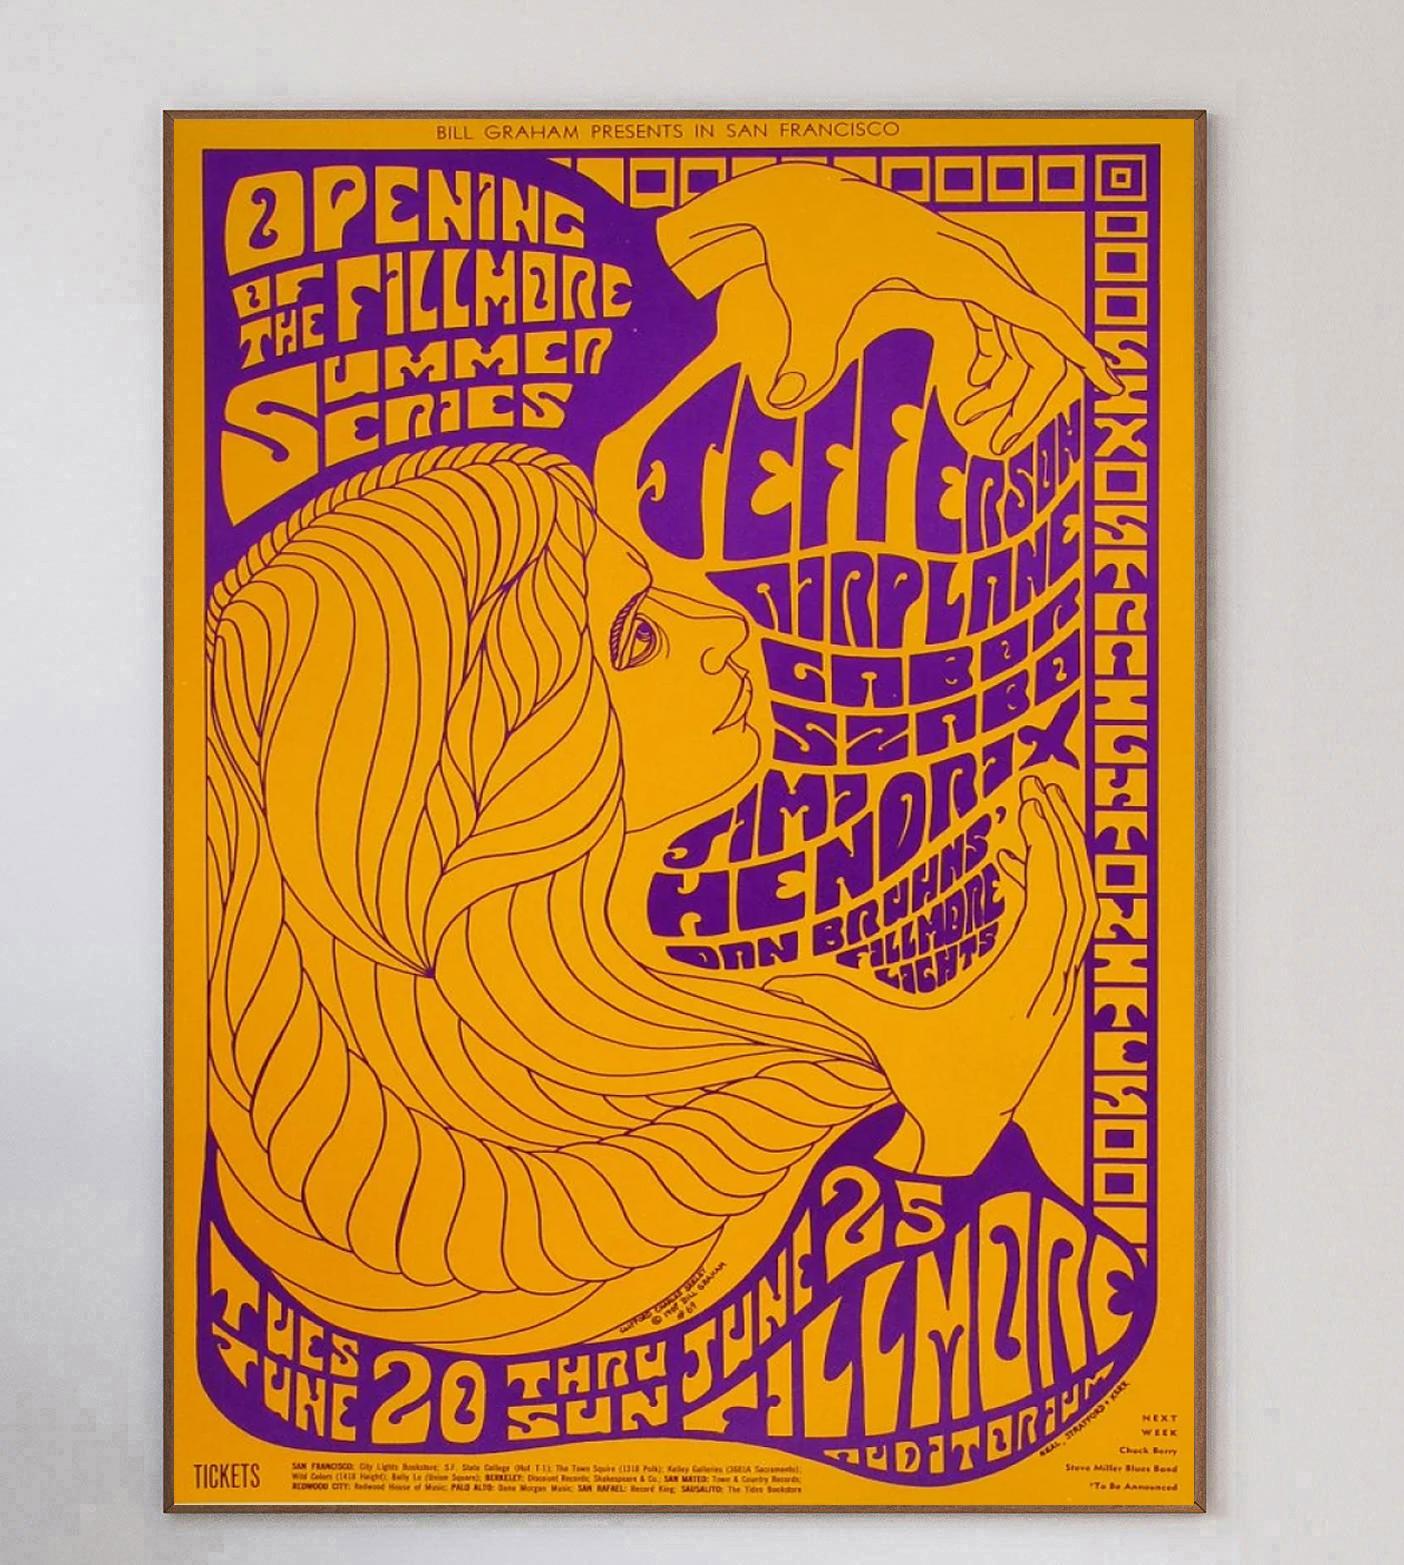 Designed by concert poster artist Clifford Charles Seeley, this beautiful poster was created in 1967 to promote a live concert of Jefferson Airplane & Jimi Hendrix at the world famous Fillmore Auditorium in San Francisco. Bill Graham events such as